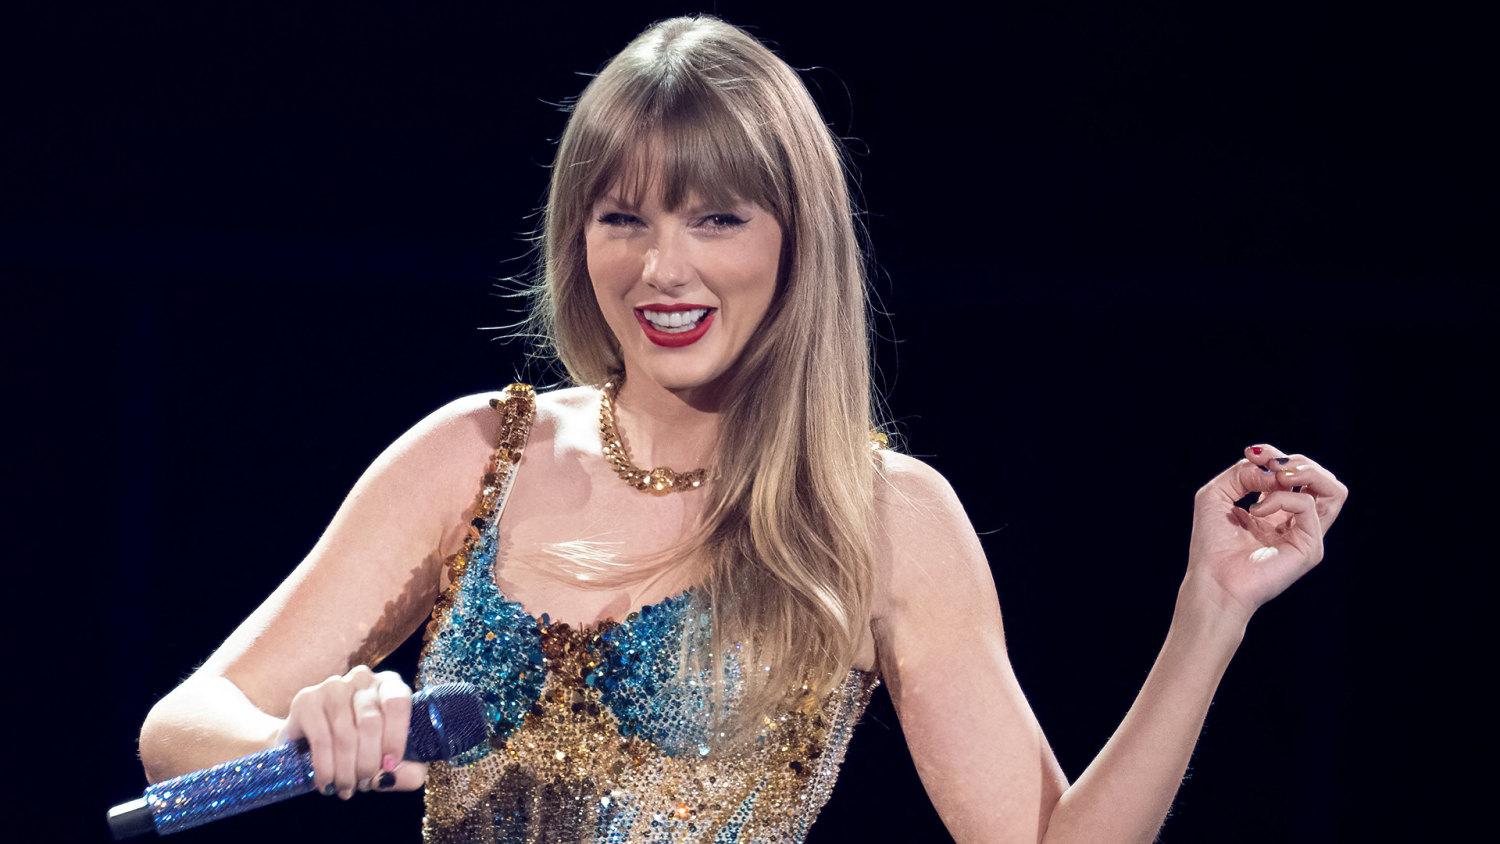 Taylor Swift Gives $100,000 Bonuses to Eras Tour Truckers